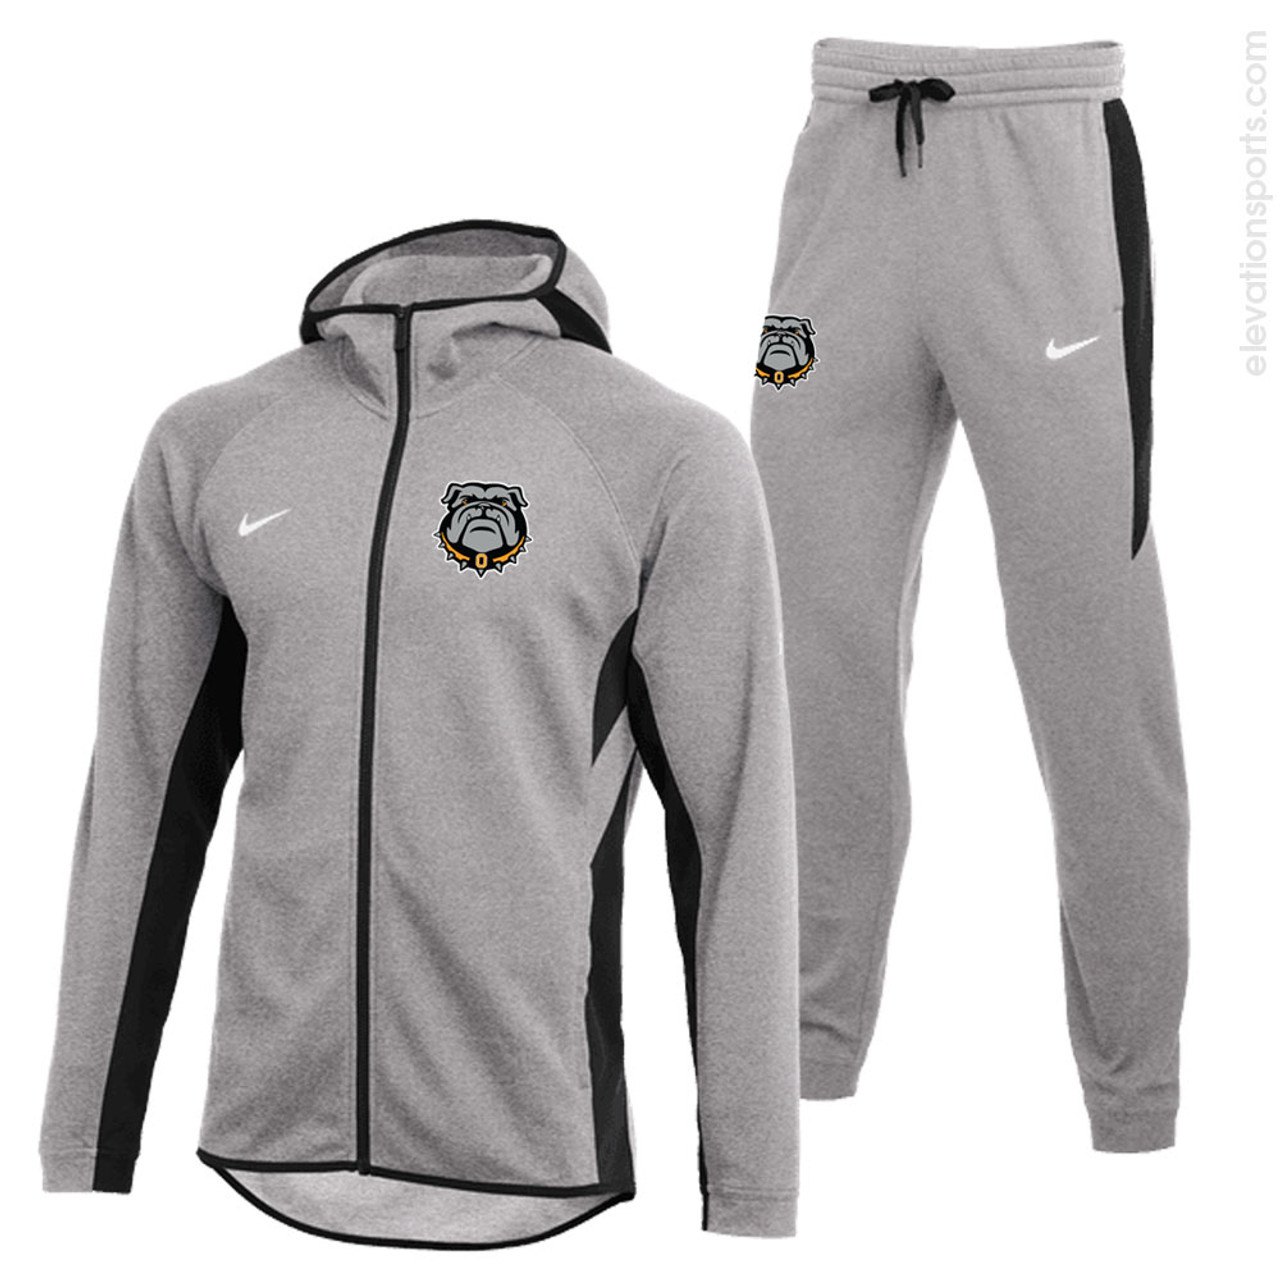 Nike Showtime Sweatsuits Elevation